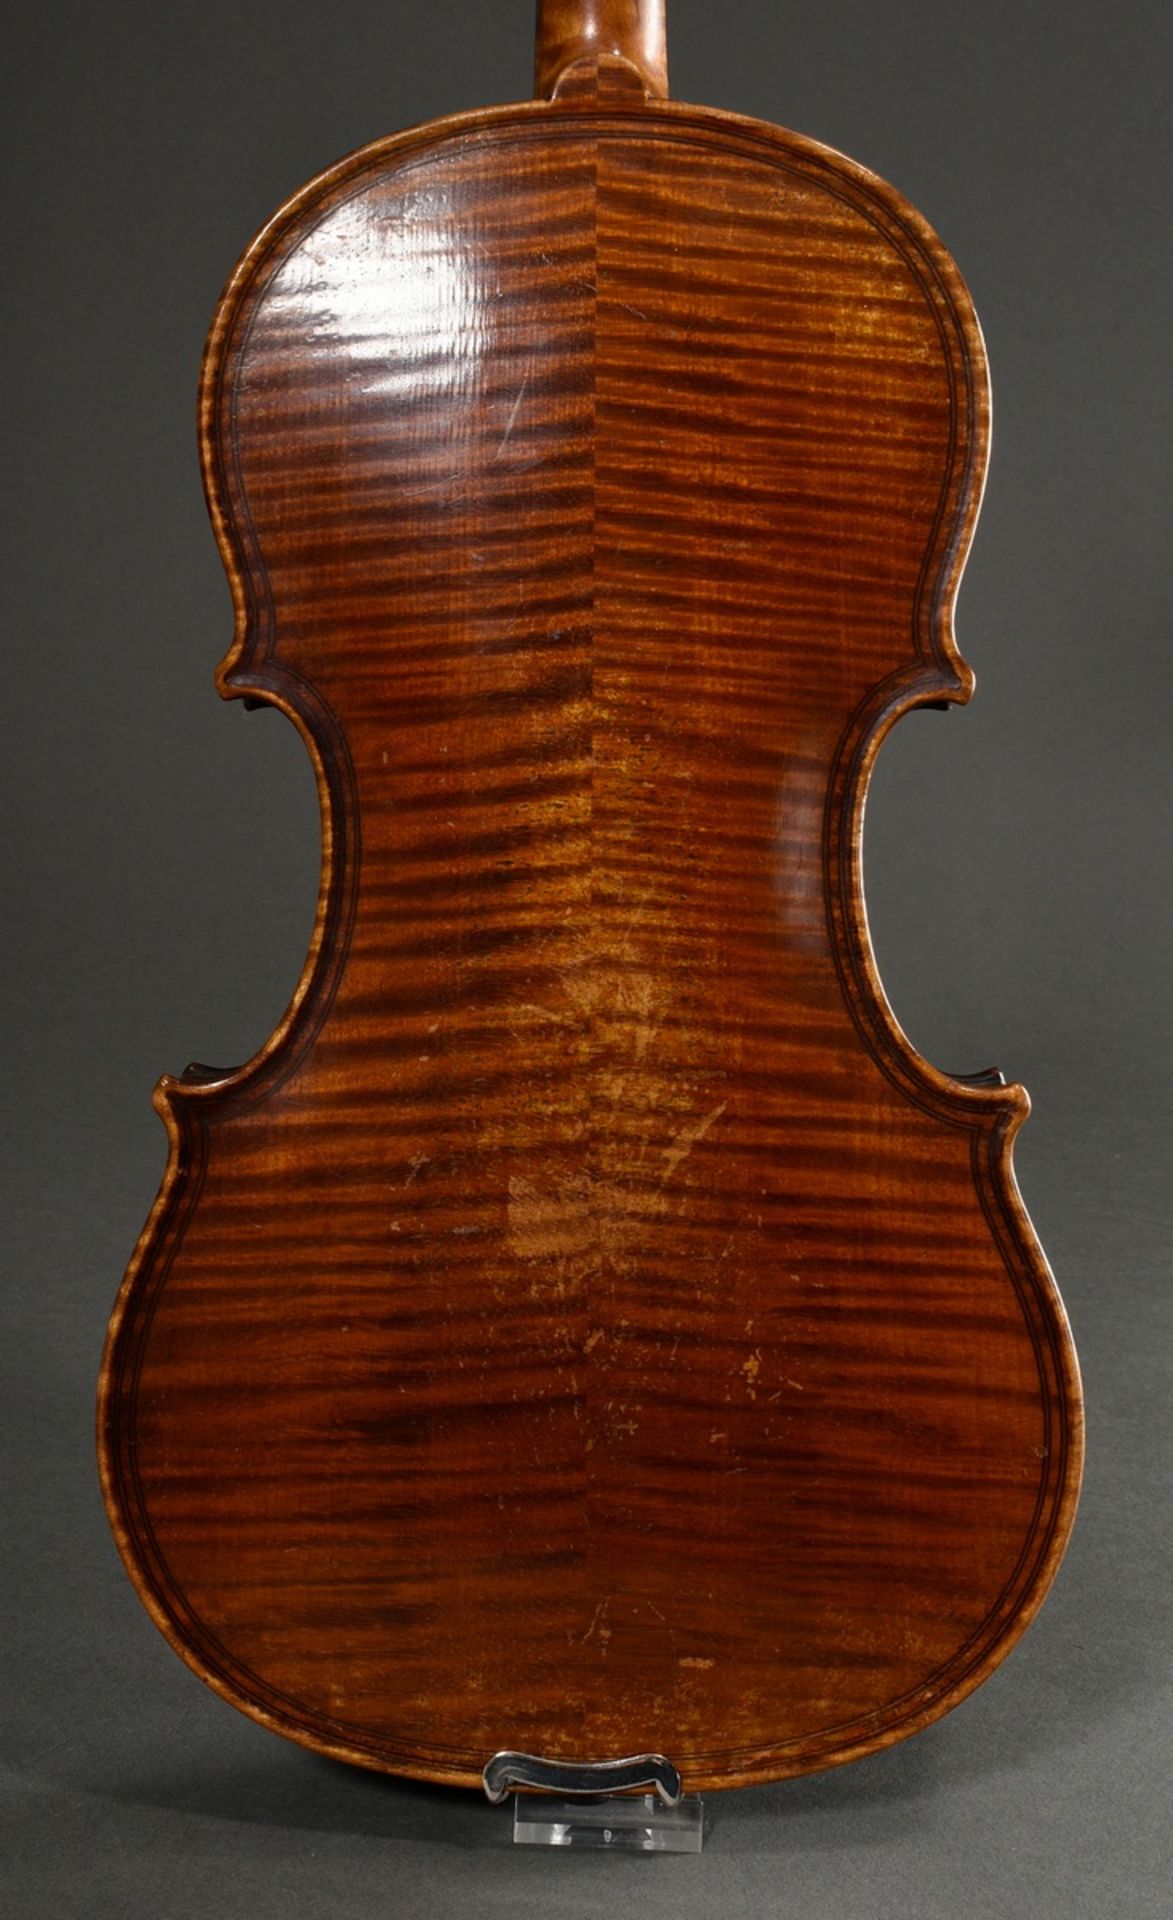 Elegant violin after Maggini, German 19th c., fine-grained spruce top, two-piece beautifully flamed - Image 4 of 16